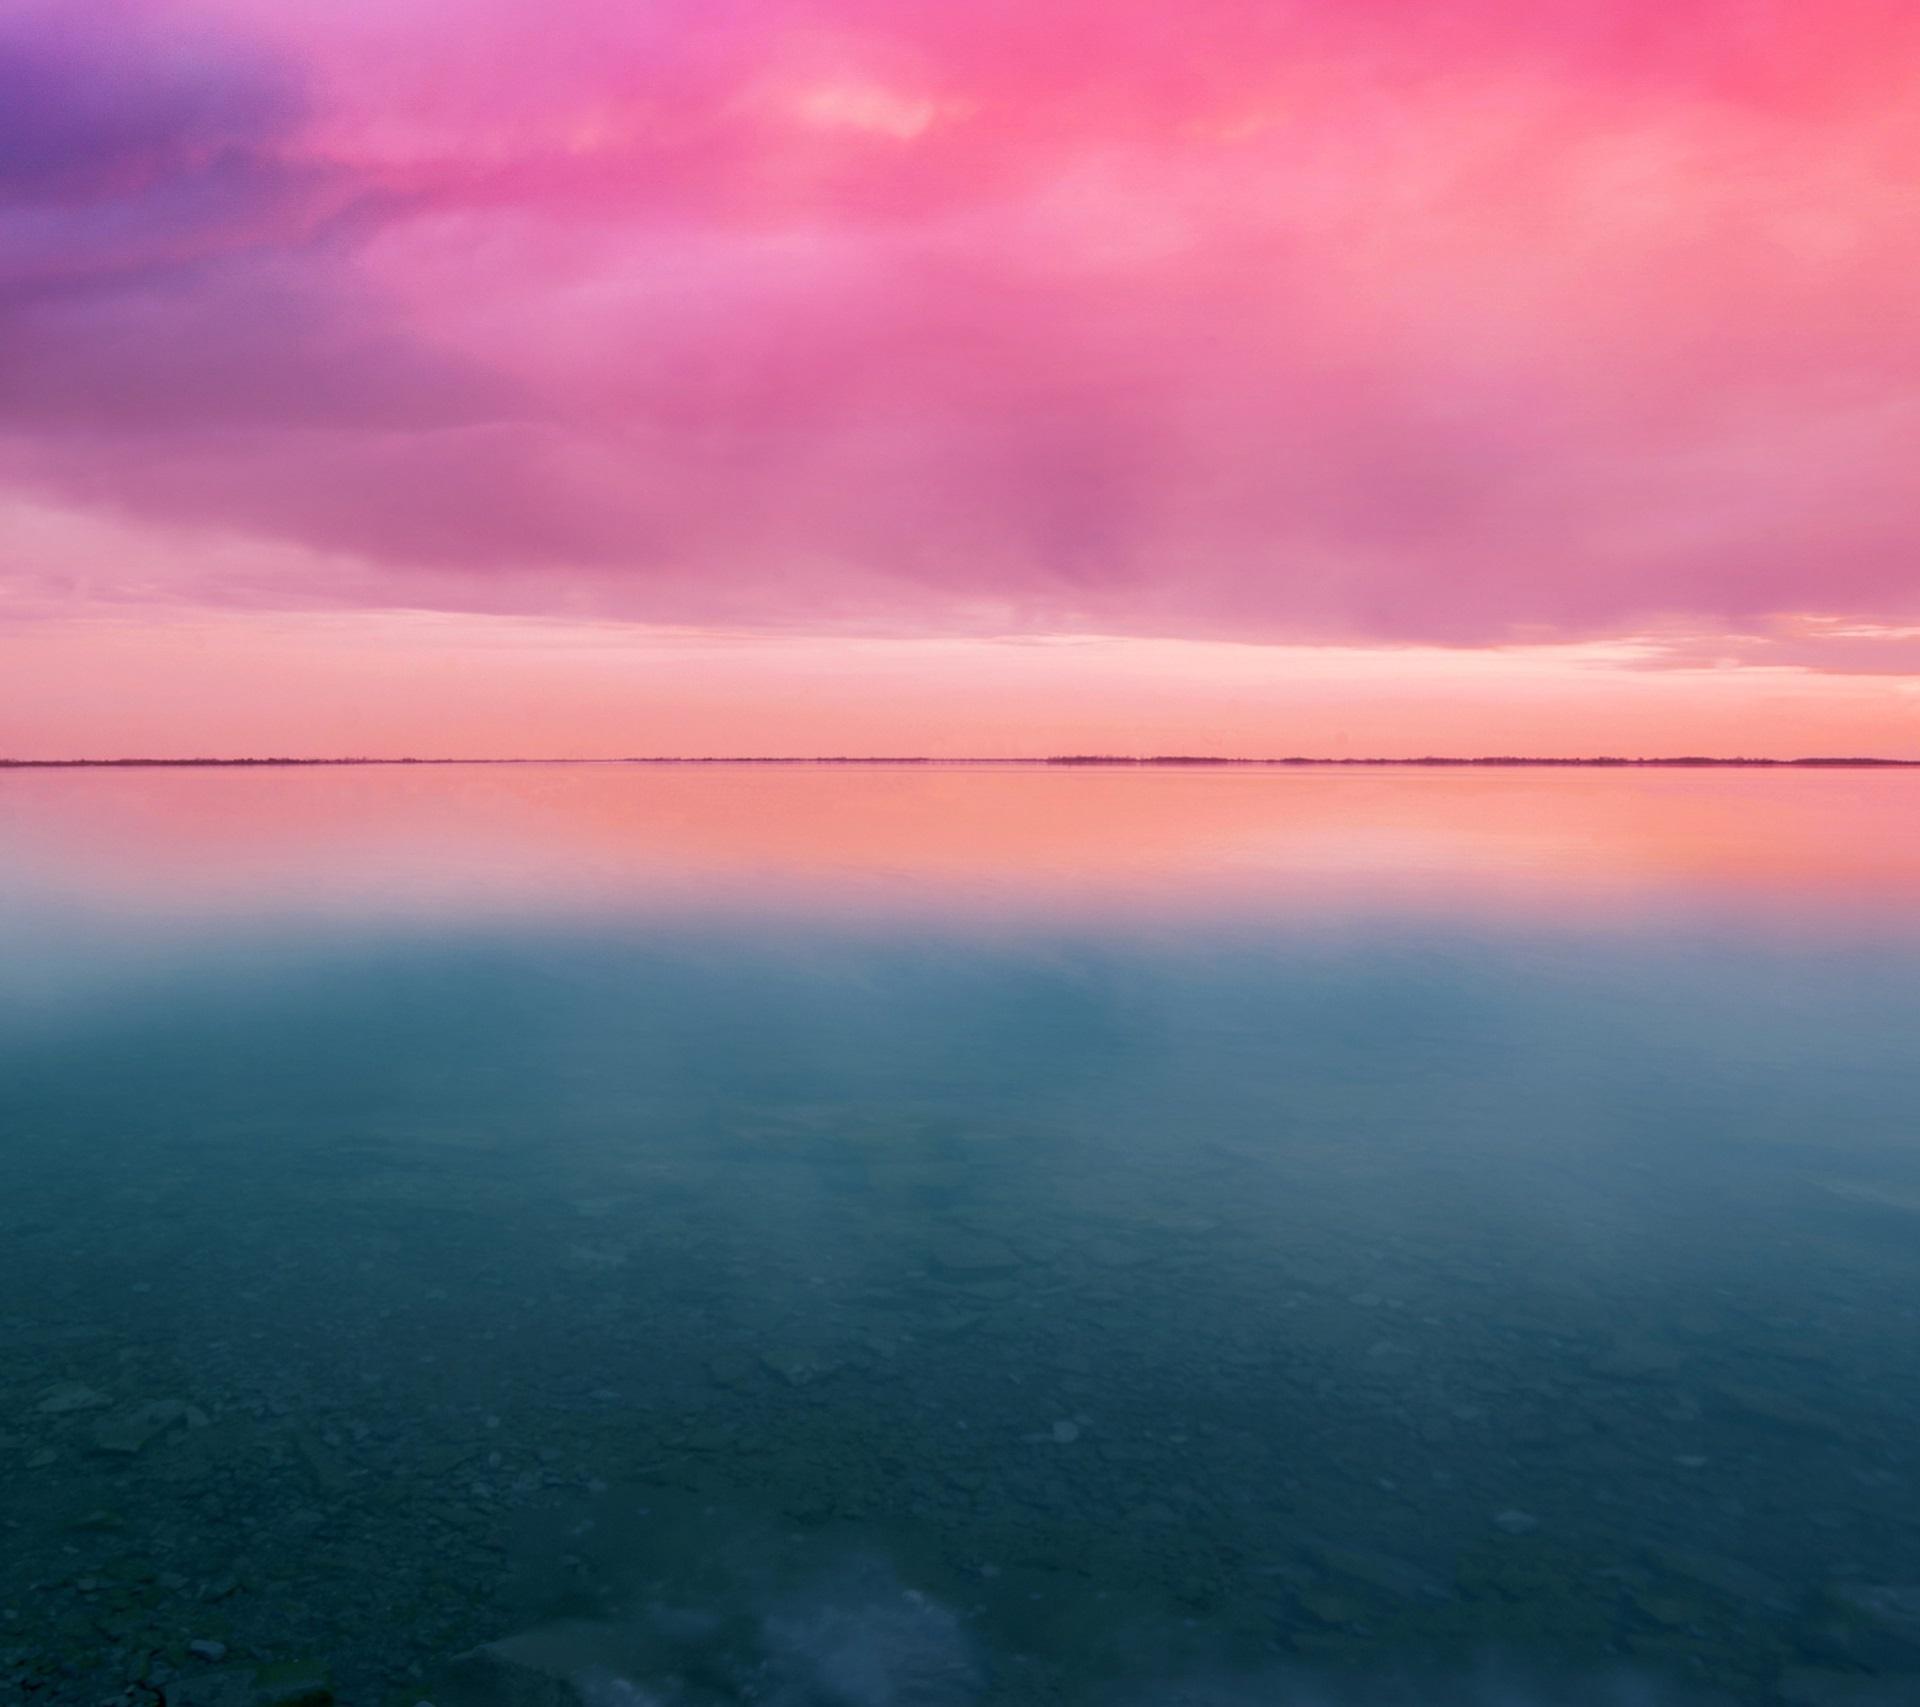 HD wallpaper, 1920X1707 Pink Clouds Wallpaper For Downloading